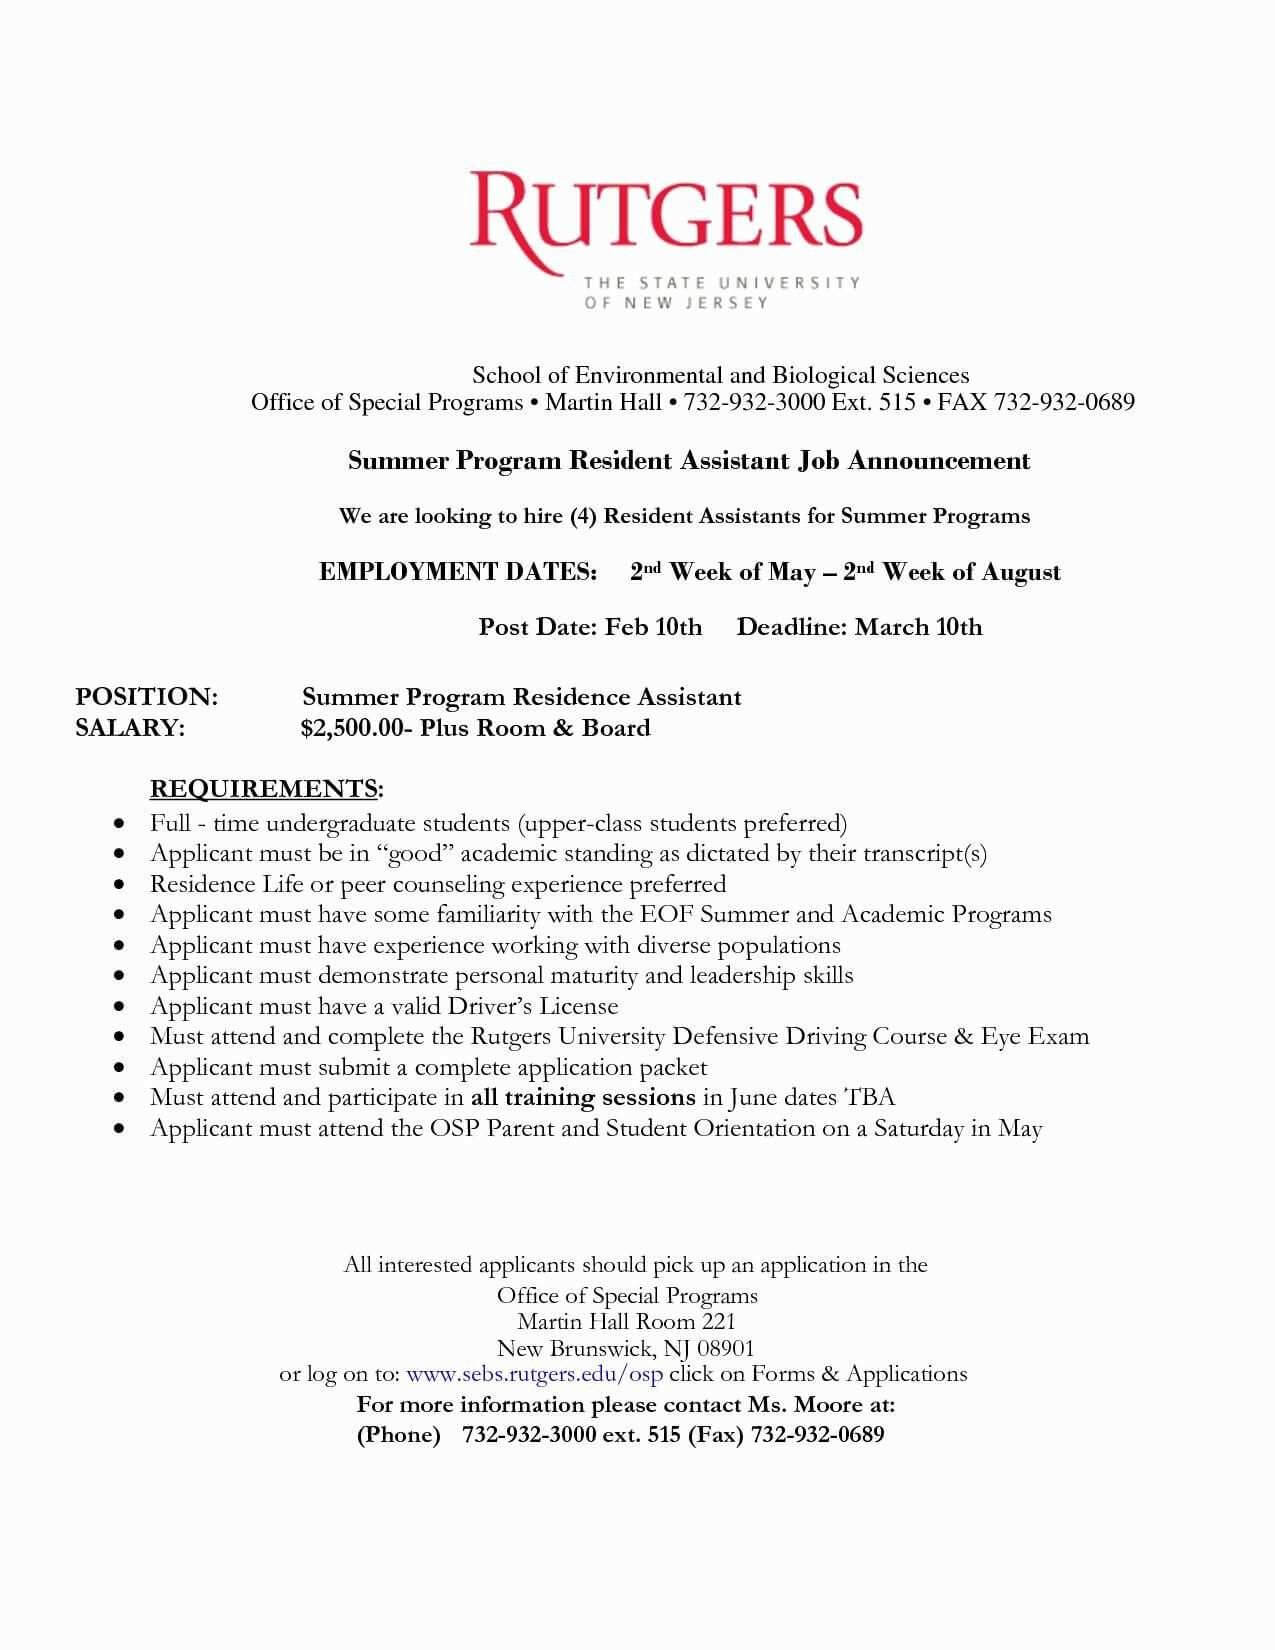 11 Rutgers Resume Template Ideas | Resume Ideas For Rutgers Powerpoint Template